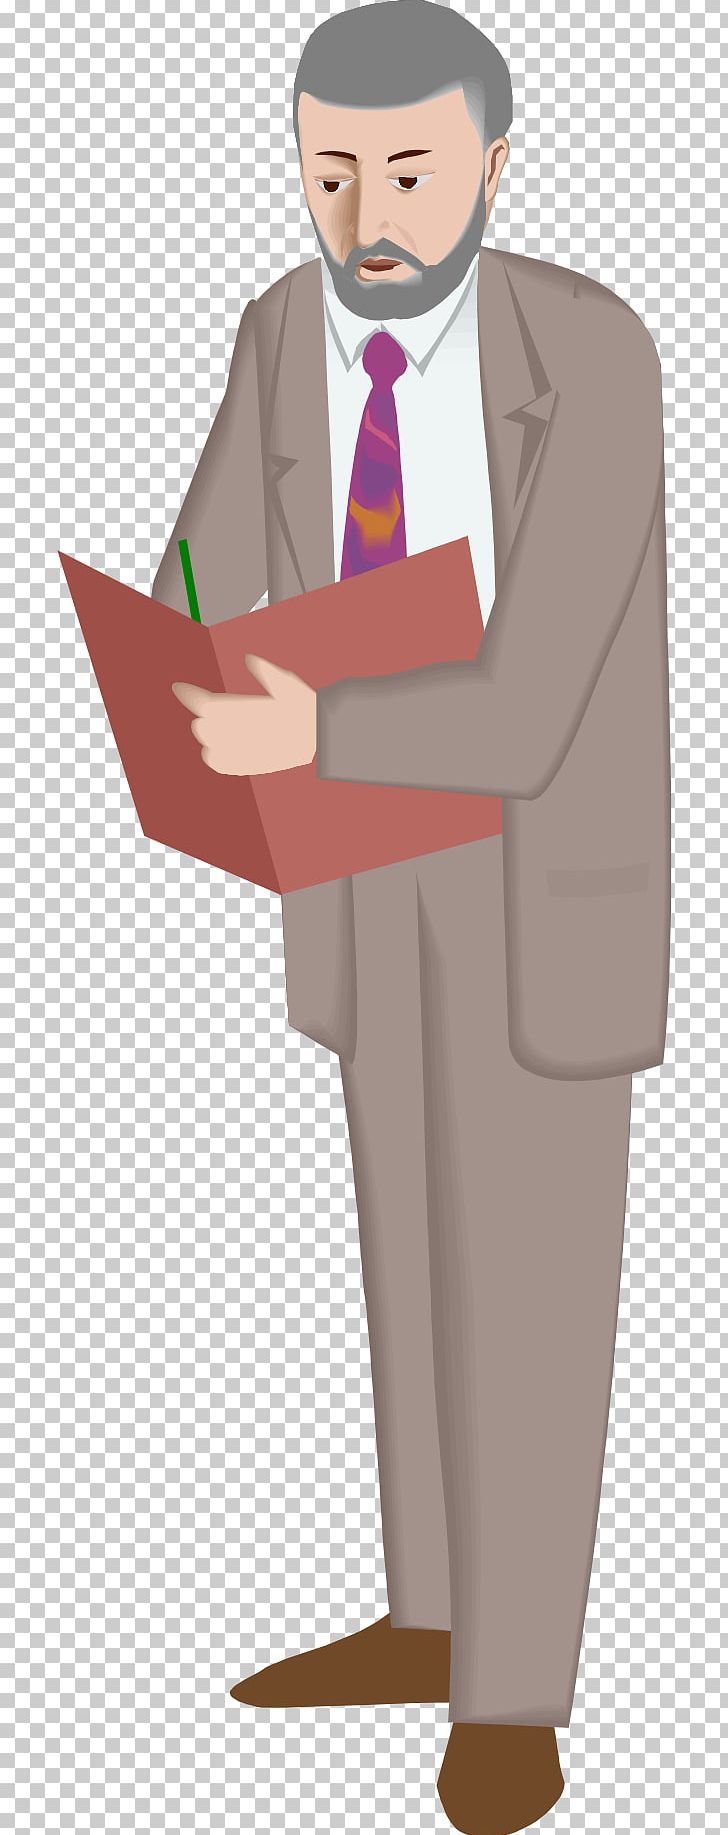 Document Computer File PNG, Clipart, Angle, Arm, Business, Cartoon, Conversation Free PNG Download